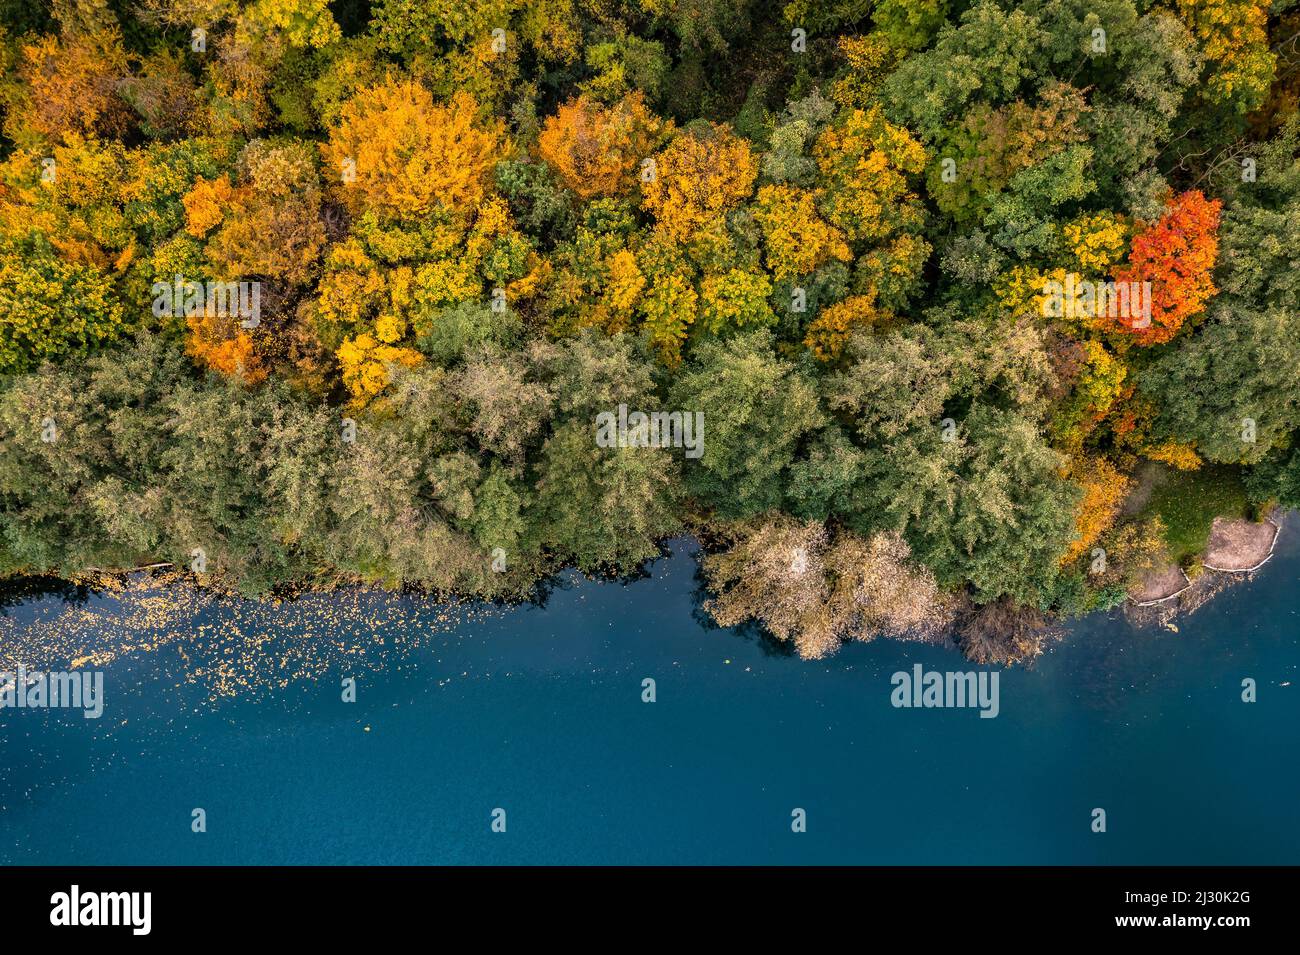 The mixed forest on the banks of a lake shows its colorful side as an aerial view in autumn, South Hesse, Germany Stock Photo